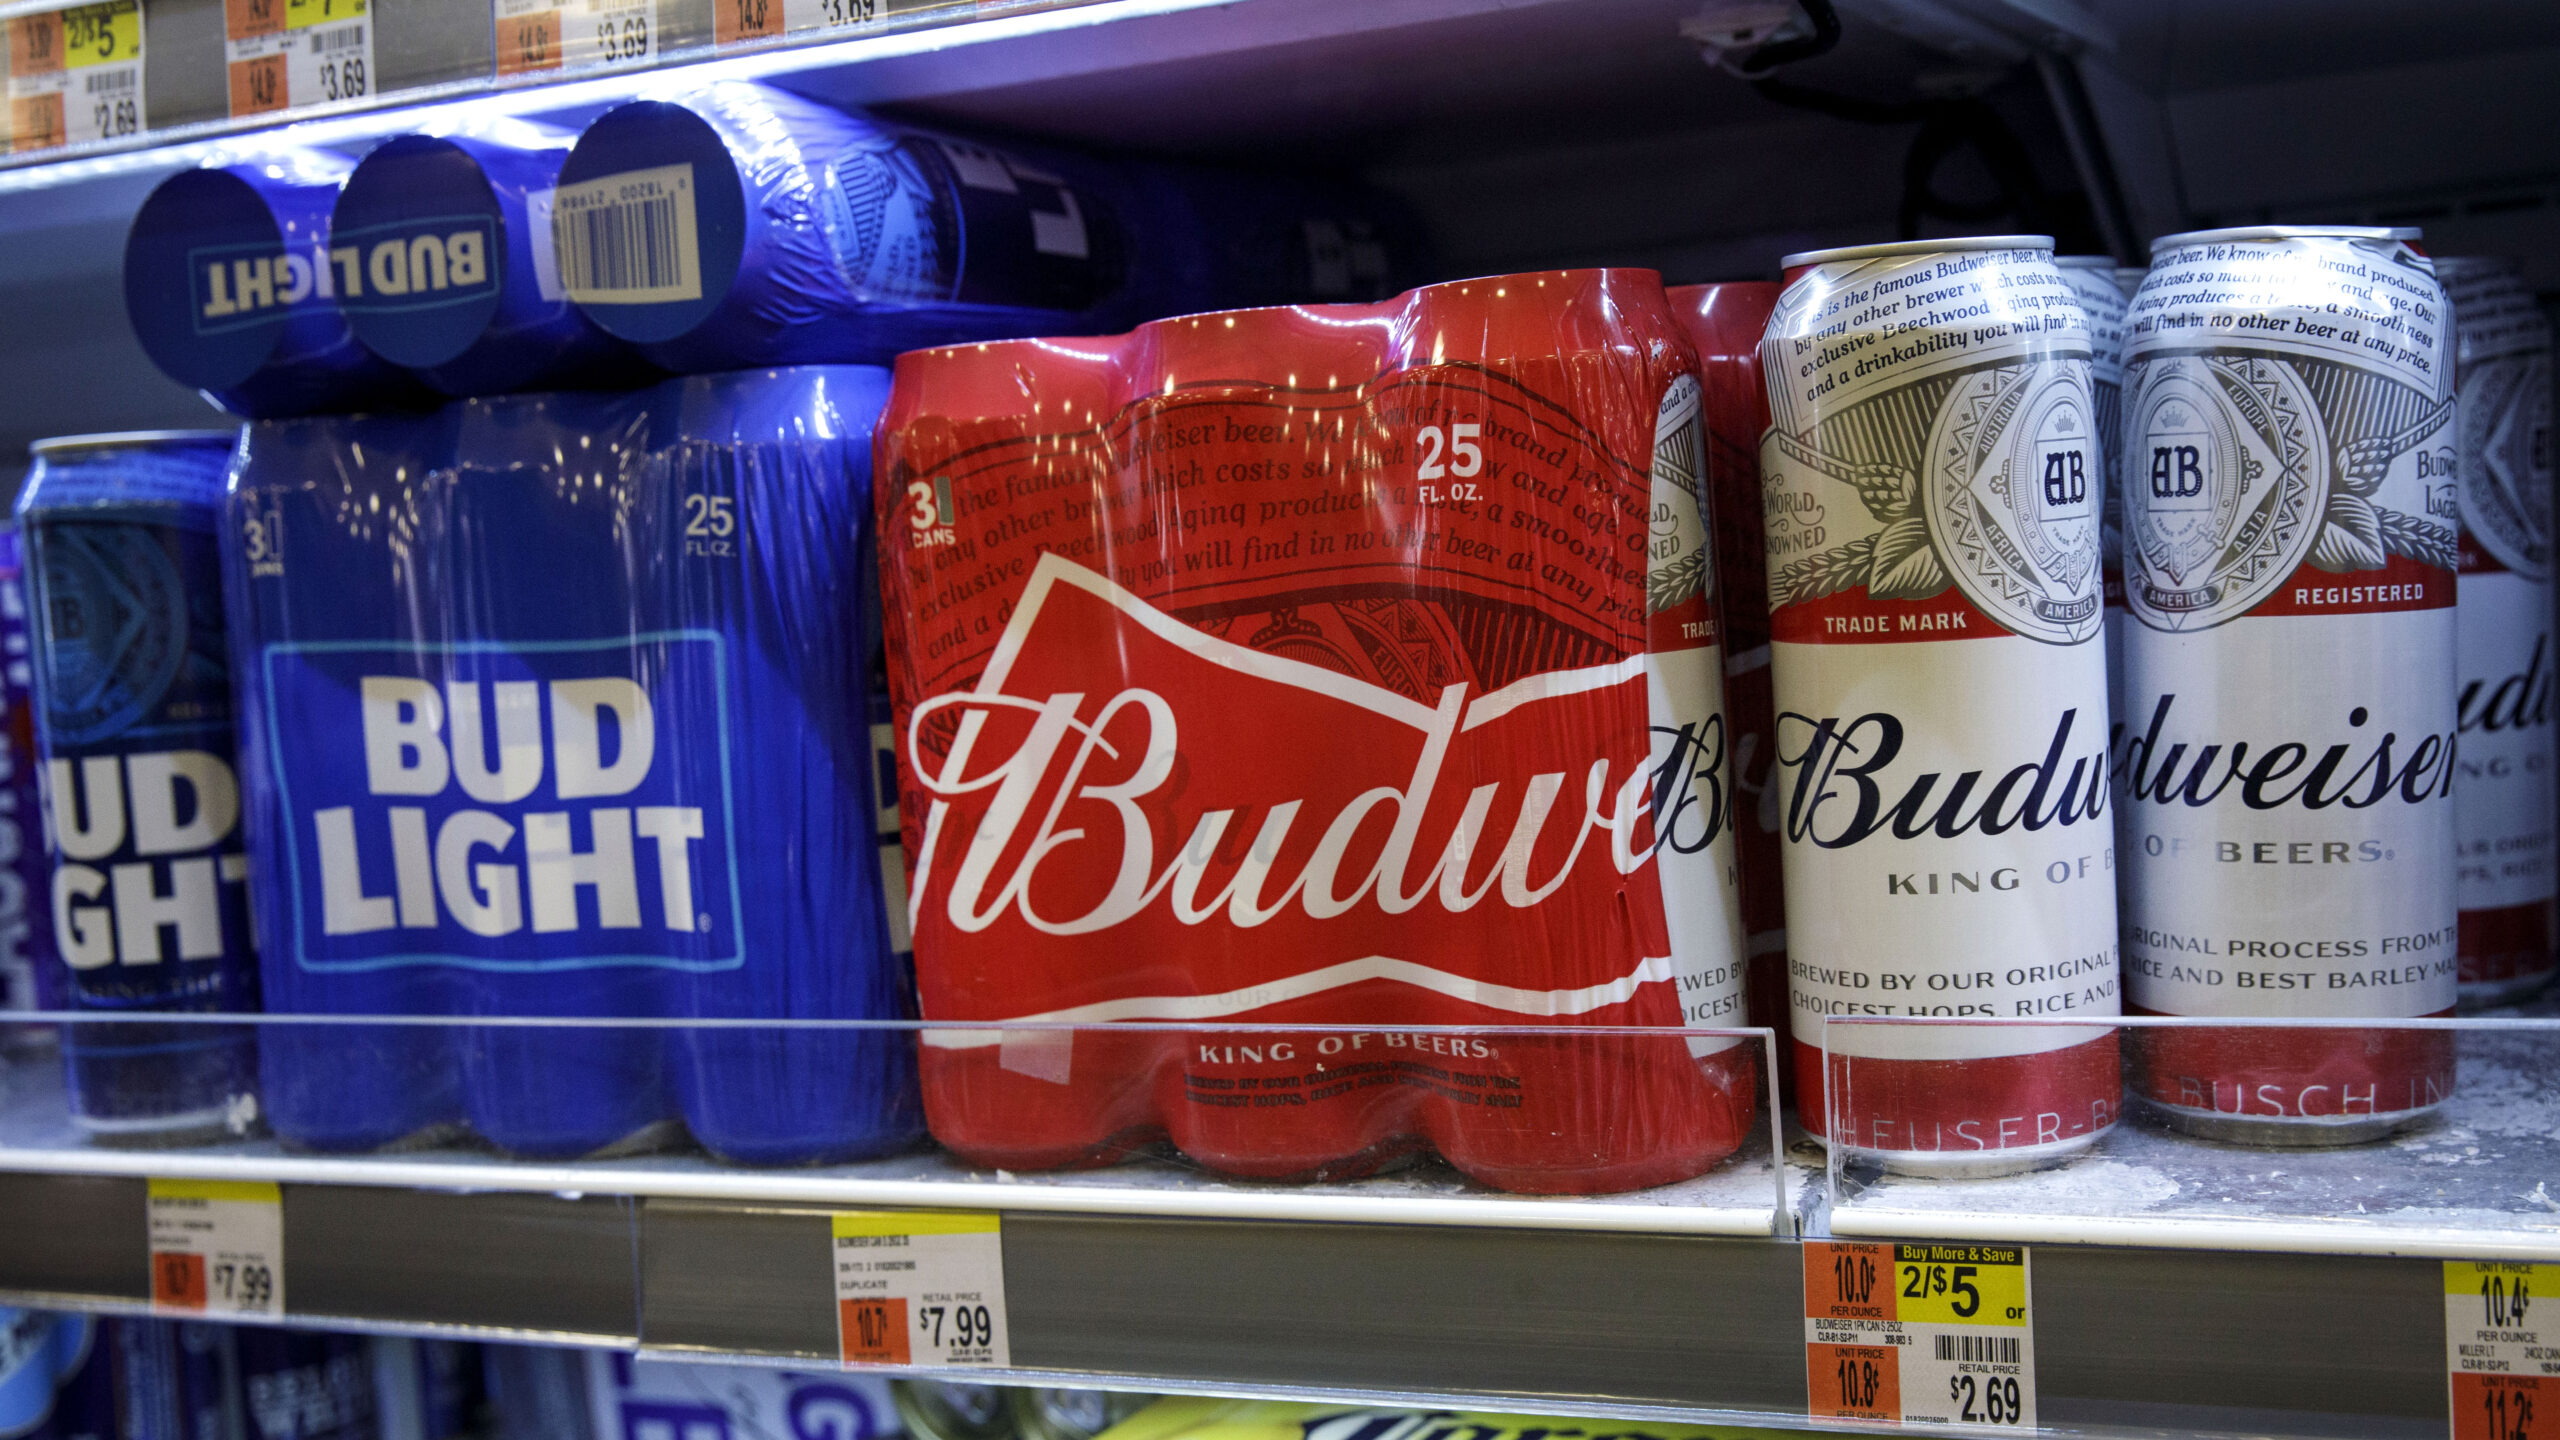 Bank lowers Anheuser-Busch stock rating due to declining sales.